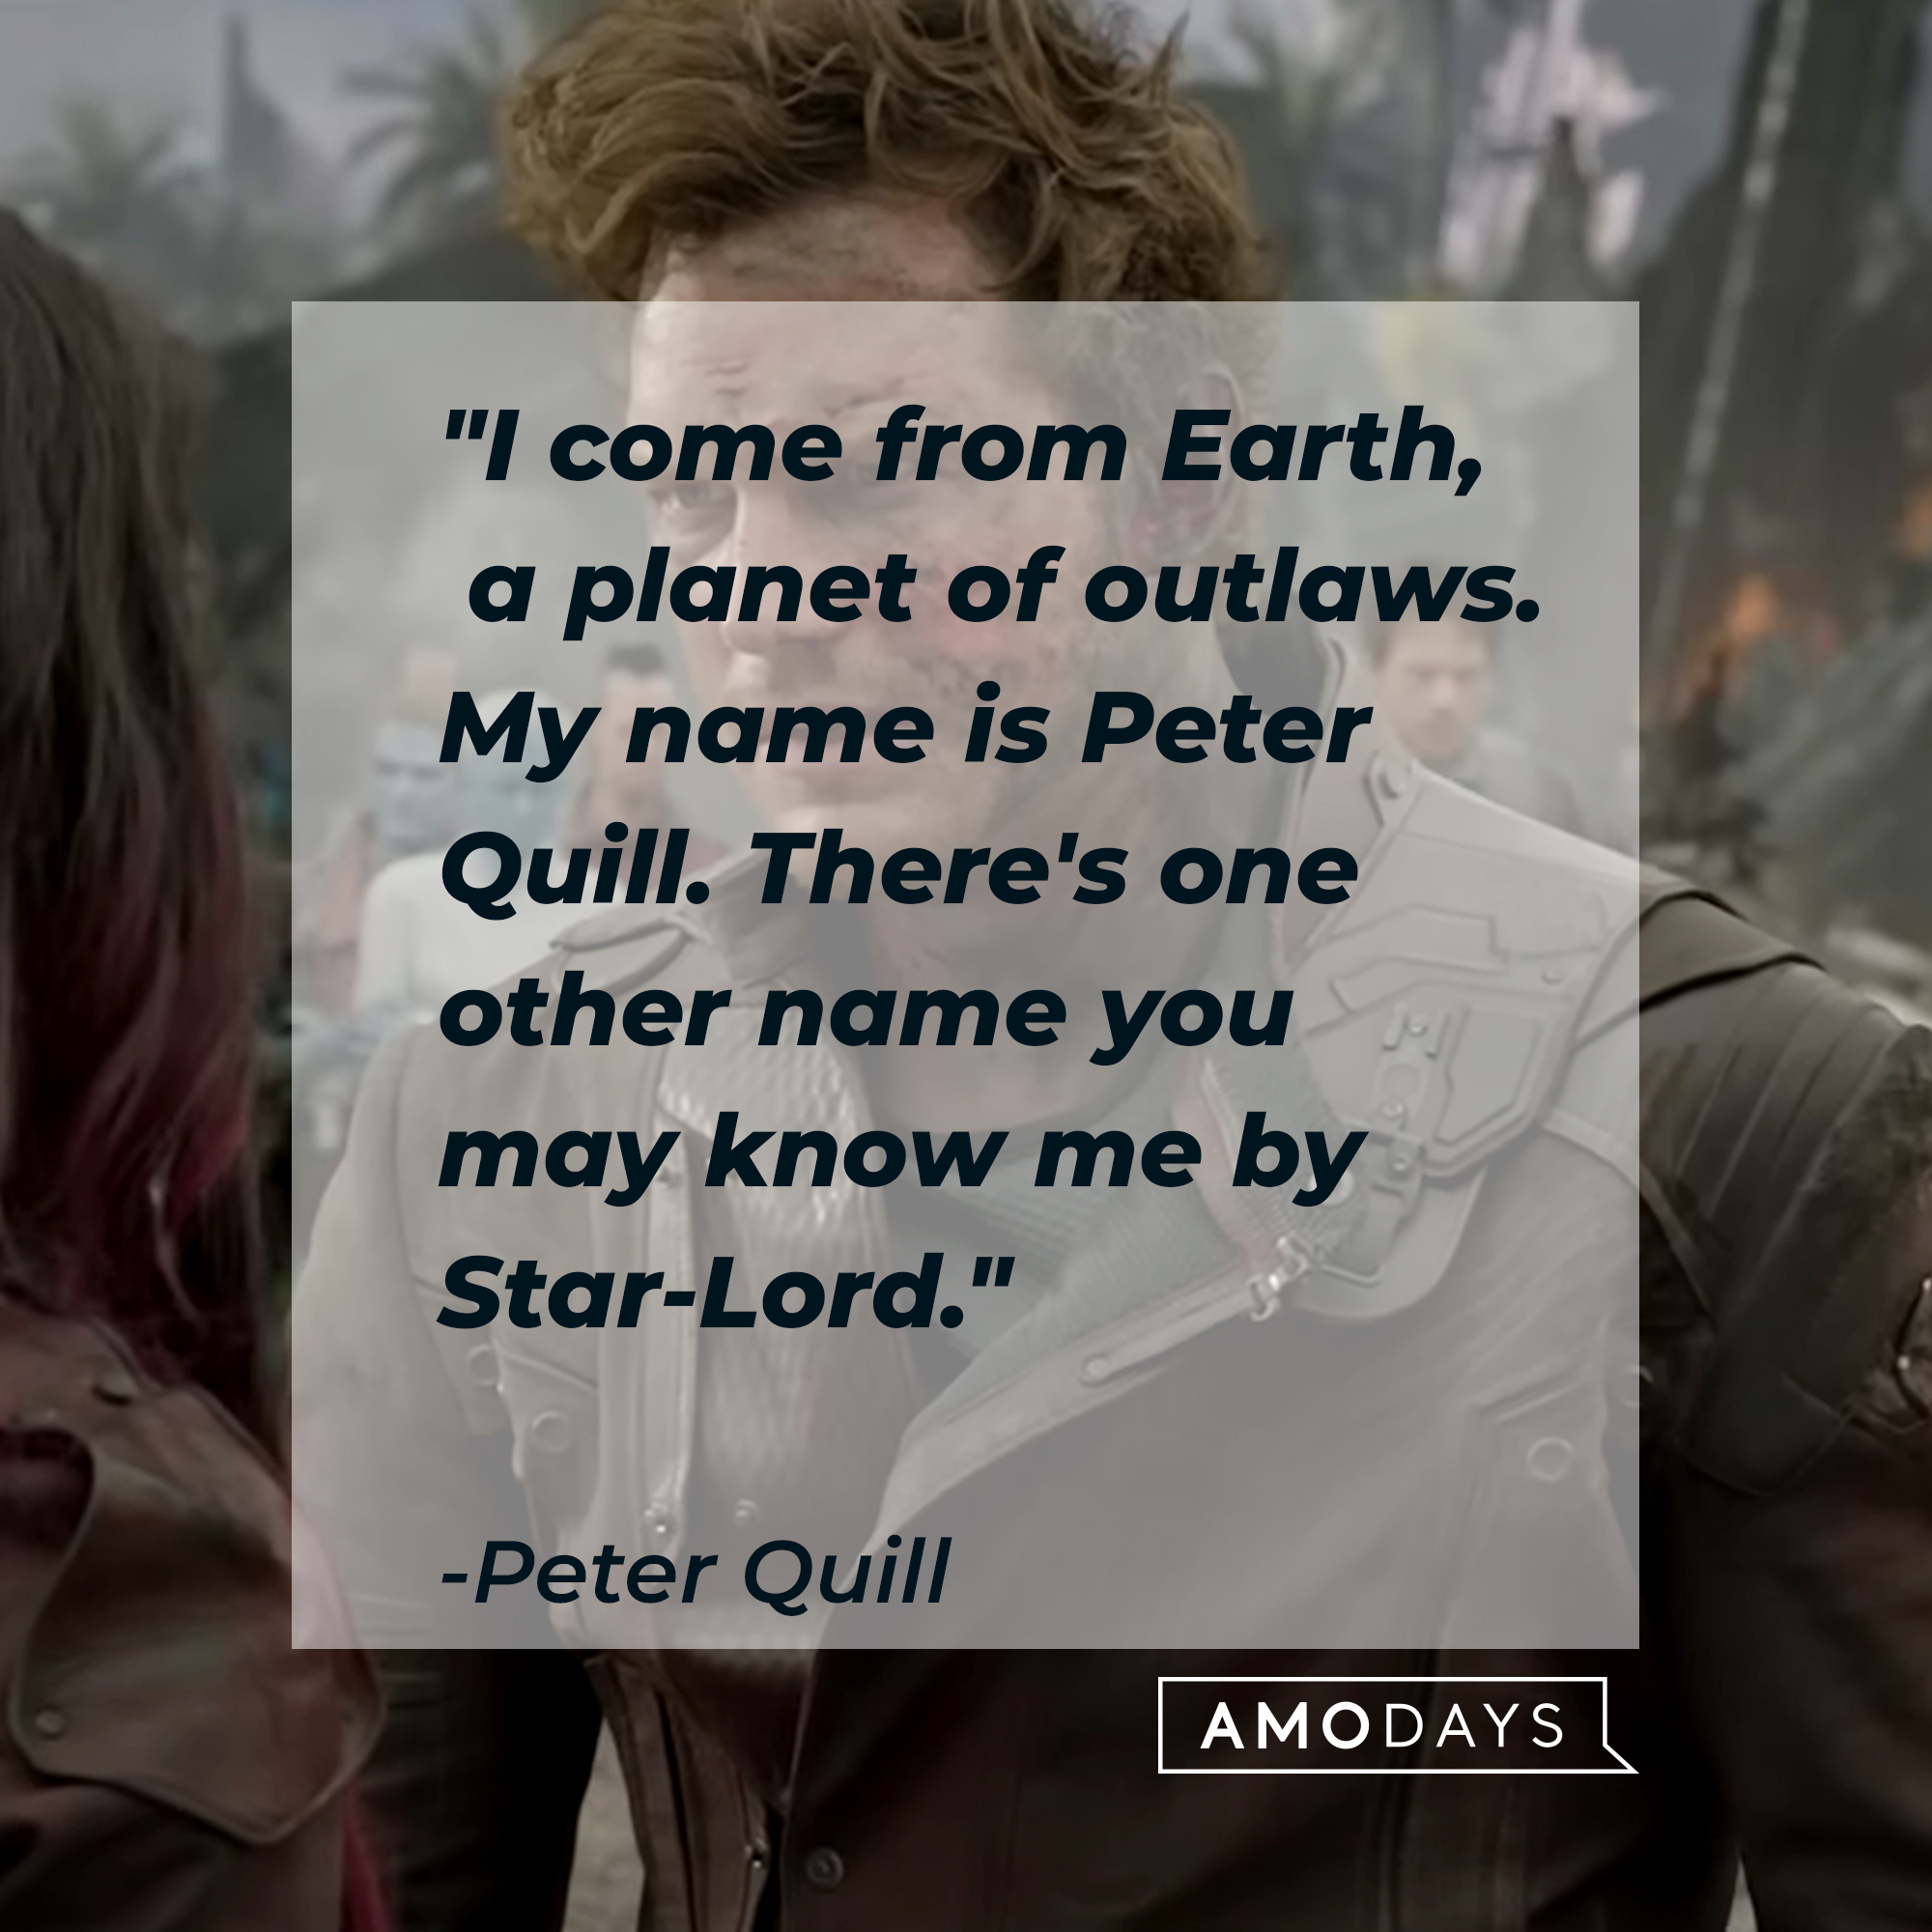 Peter Quill's quote, "I come from Earth, a planet of outlaws. My name is Peter Quill. There's one other name you may know me by Star-Lord." | Image: youtube.com/marvel